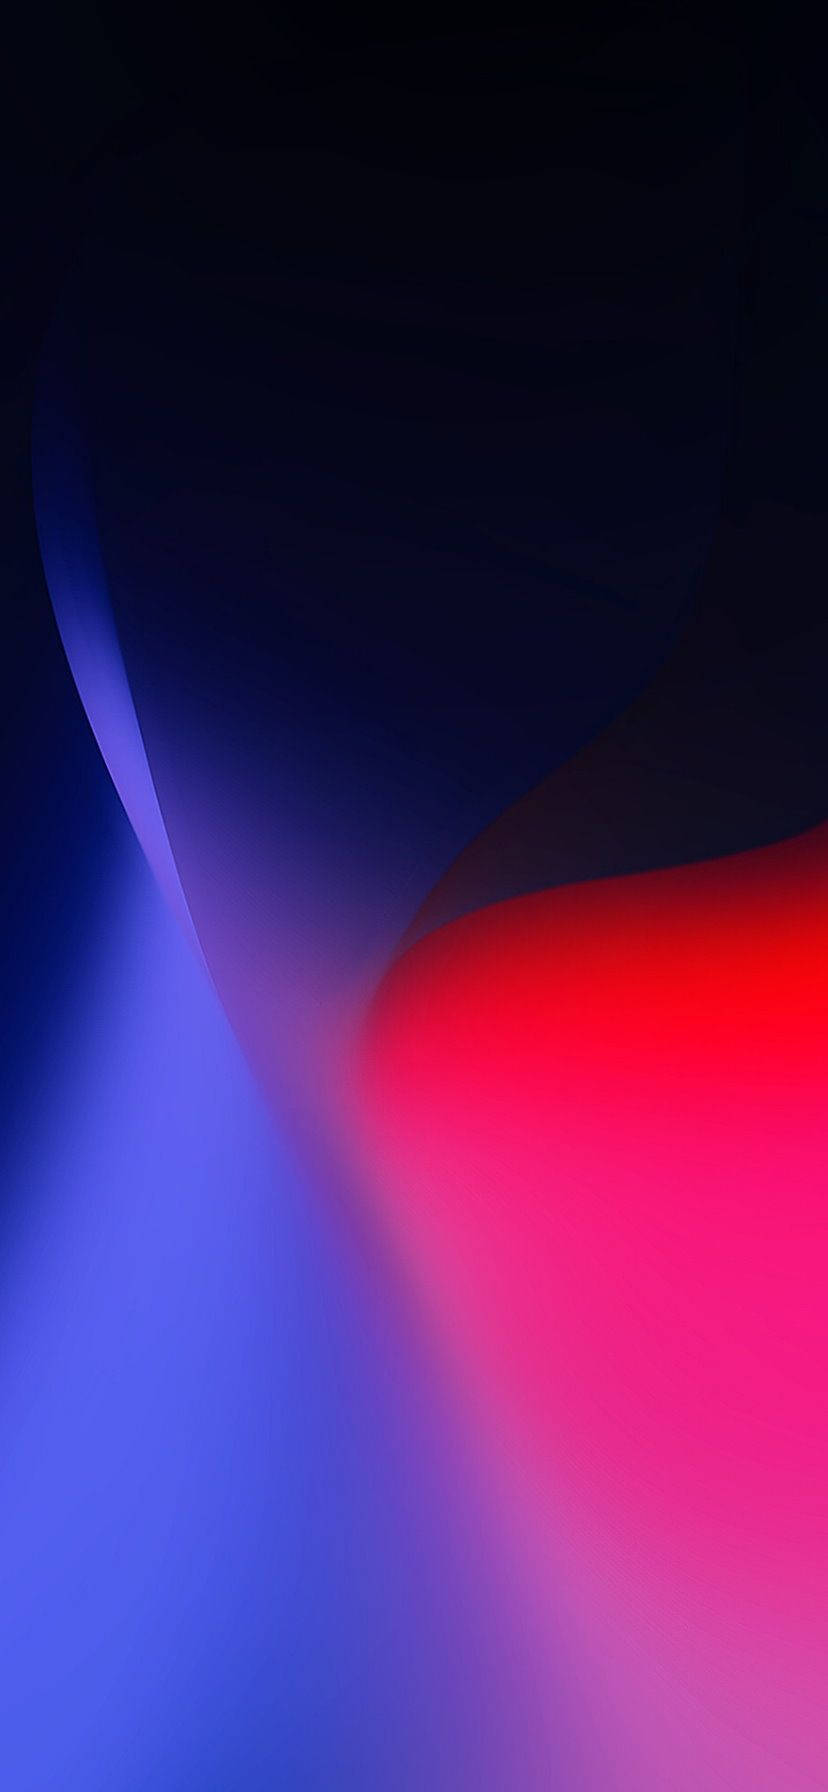 Iphone Xr Blue Red Coiled Picture